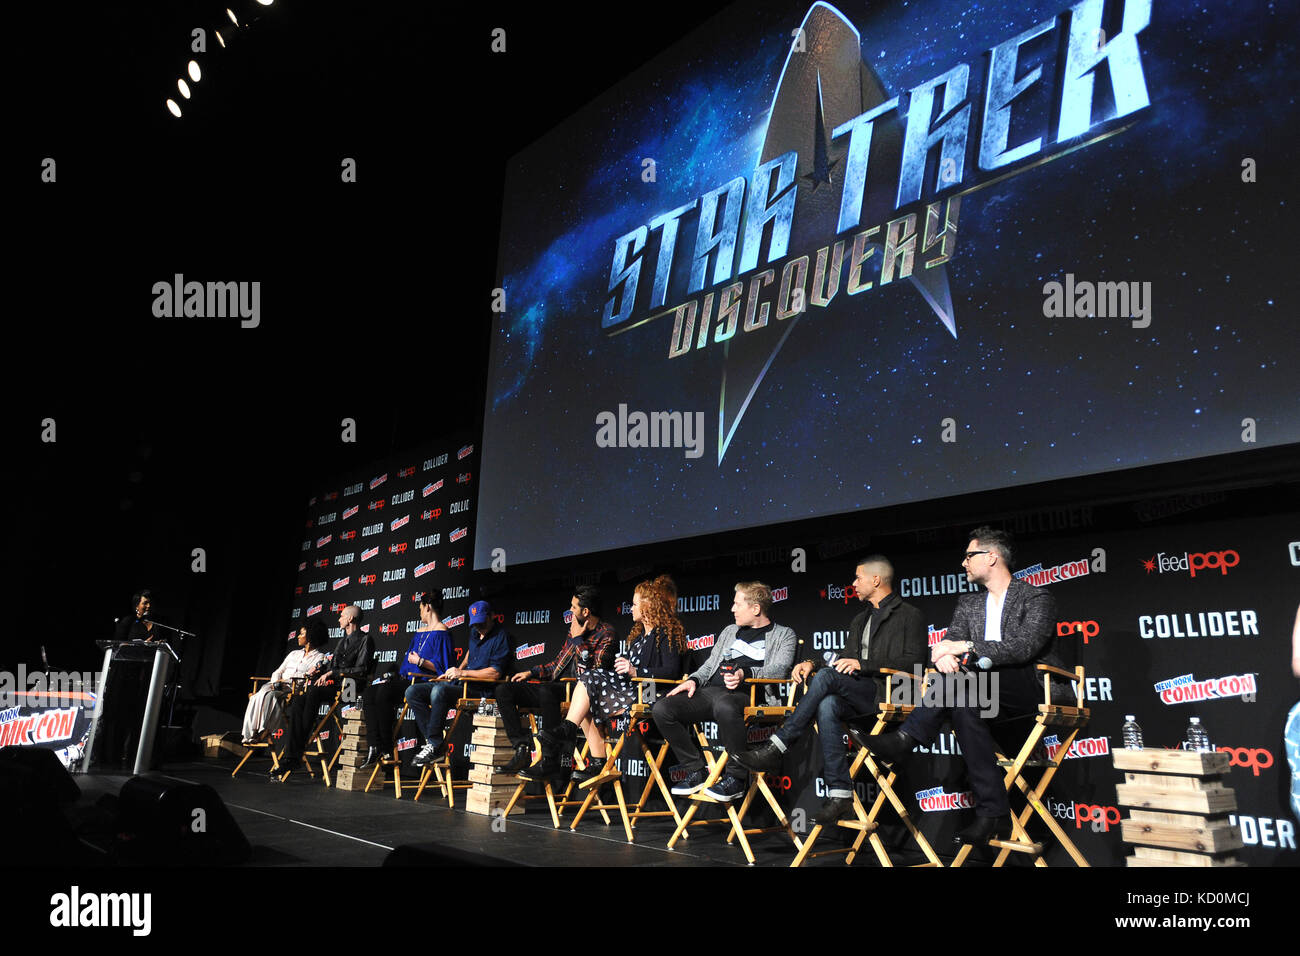 Mae Jemison, Sonequa Martin-Green, Doug Jones, Mary Chieffo, Jason Isaacs, Shazad Latif, Mary Wiseman, Anthony Rapp, Wilson Cruz and Aaron Harberts attend the 'Star Trek: Discovery' Panel at The Theater at Madison Square Garden during the New York Comic Con 2017 on October 7, 2017 in New York City. Stock Photo